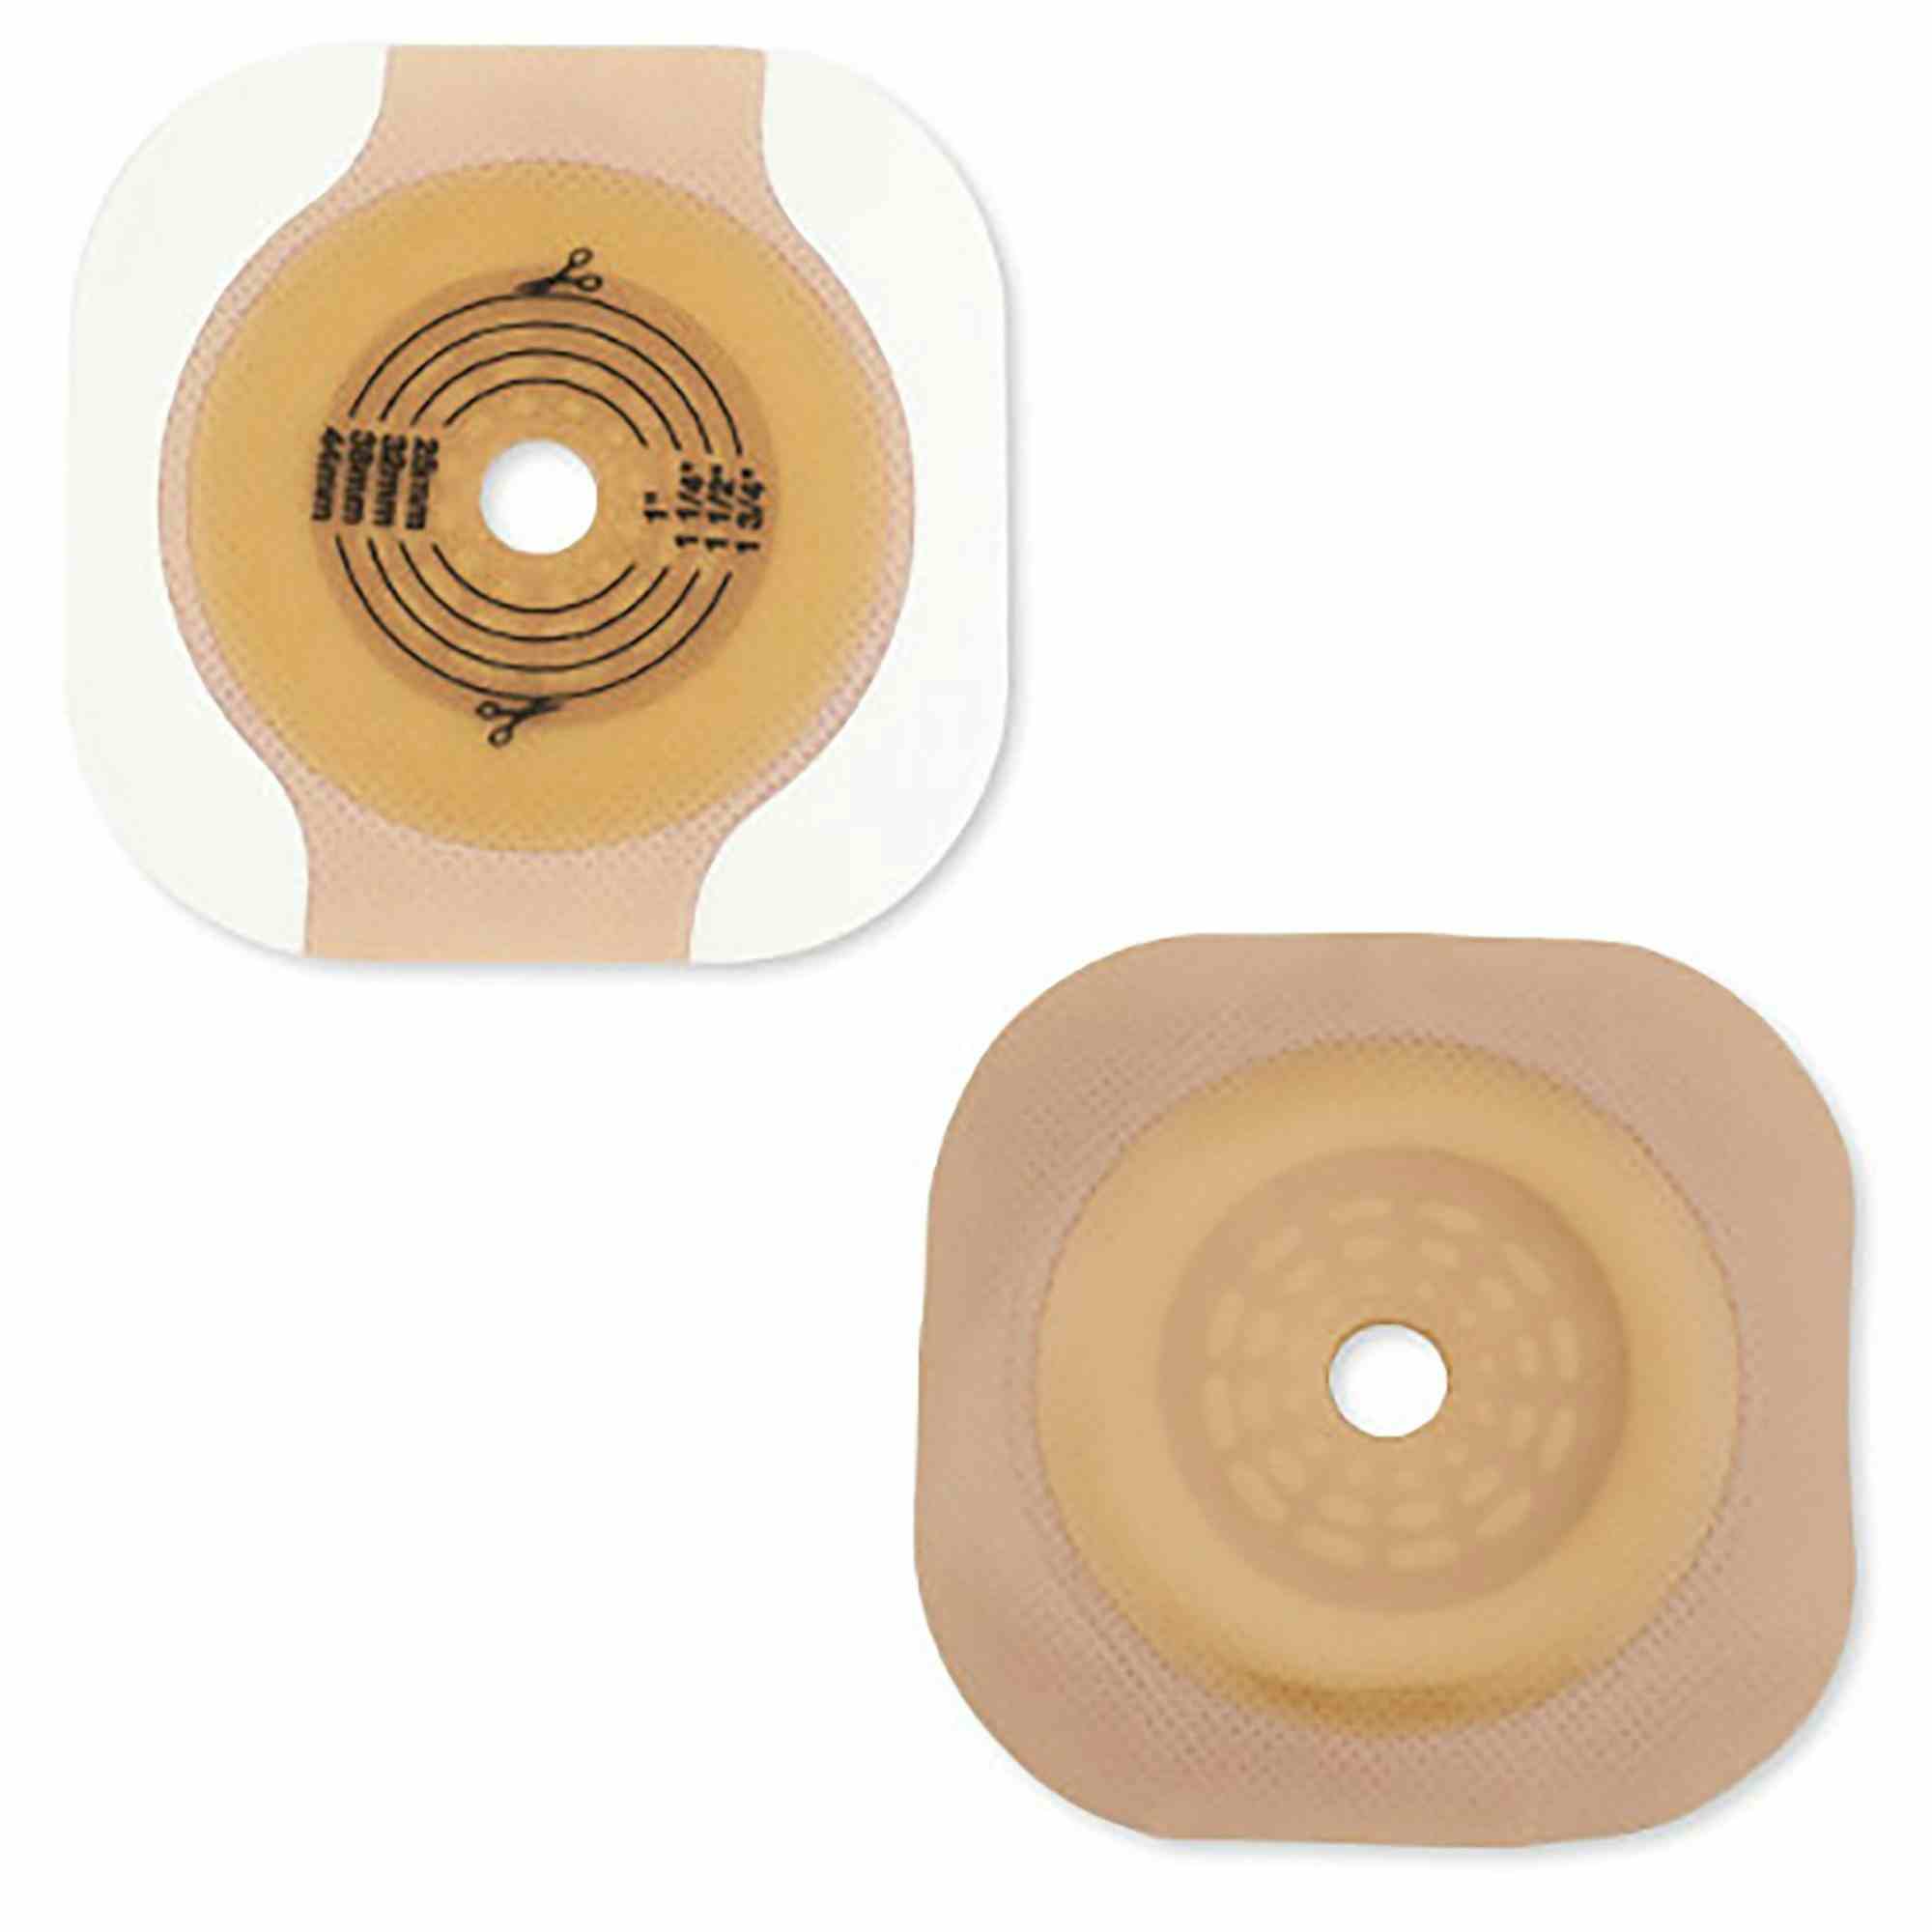 New Image CeraPlus Skin Barrier, Trim to Fit, 70 mm Flange, Up to 2.25" Opening, 11204, Box of 5